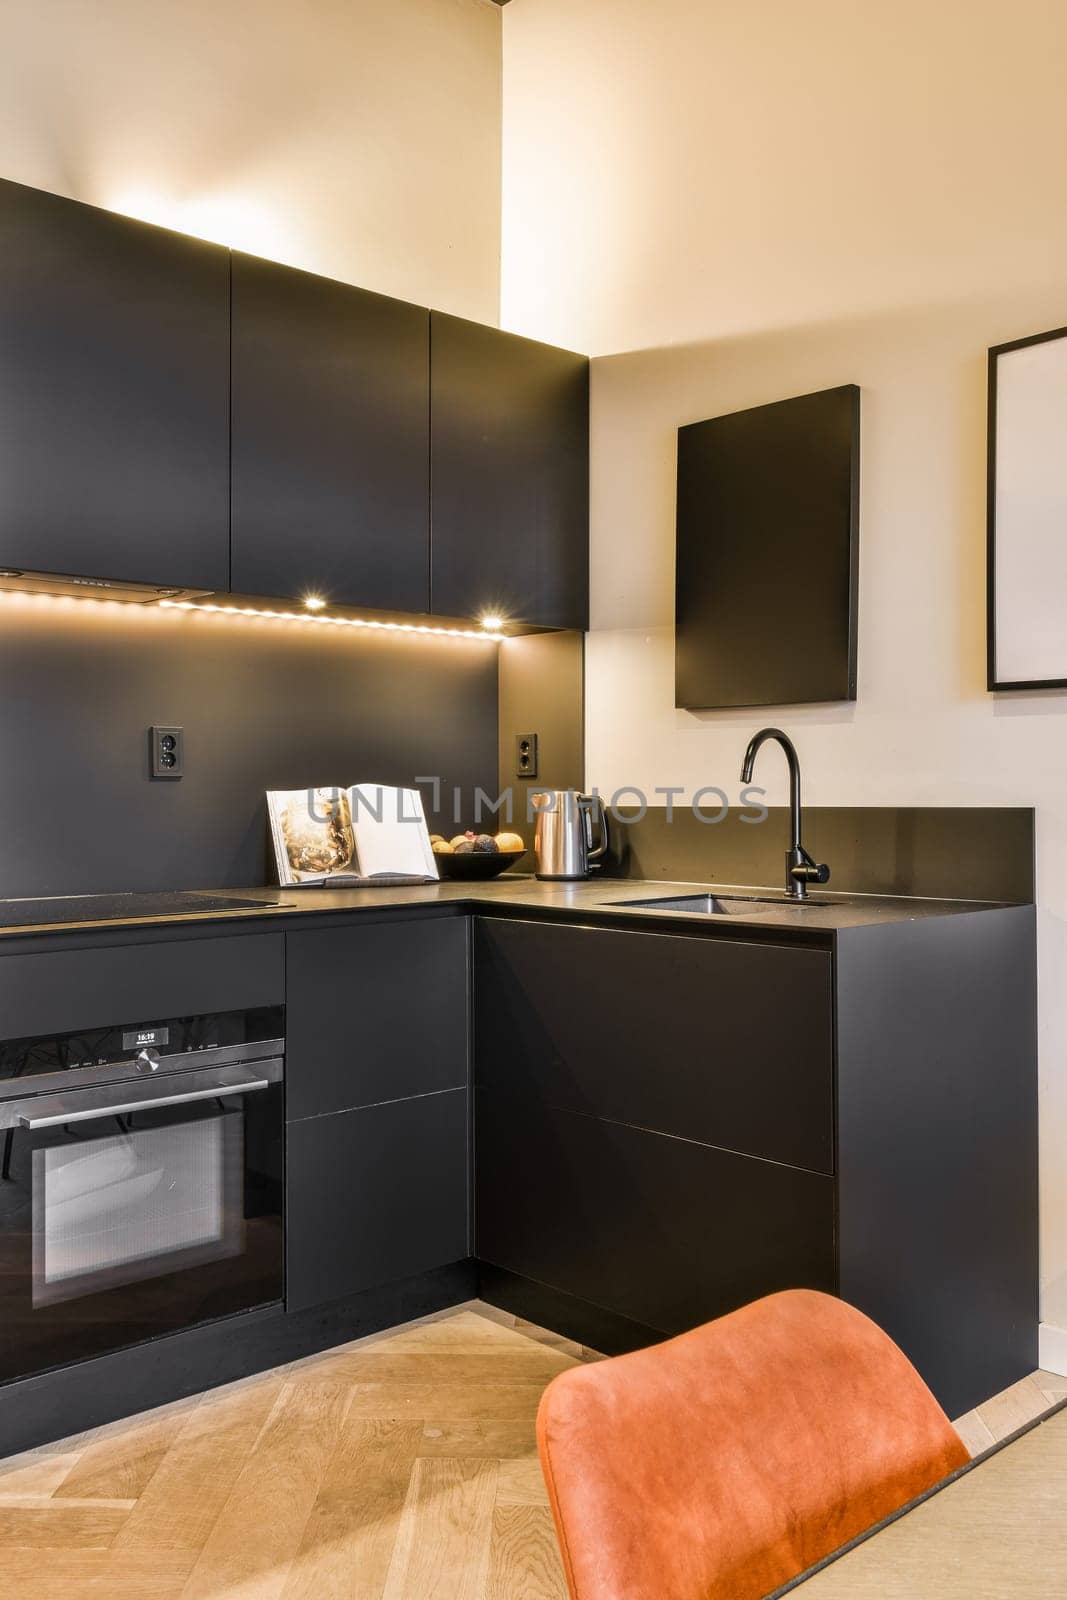 Amsterdam, Netherlands - 10 April, 2021: a modern kitchen with black cabinets and an orange chair in the center of the photo is framed on the wall